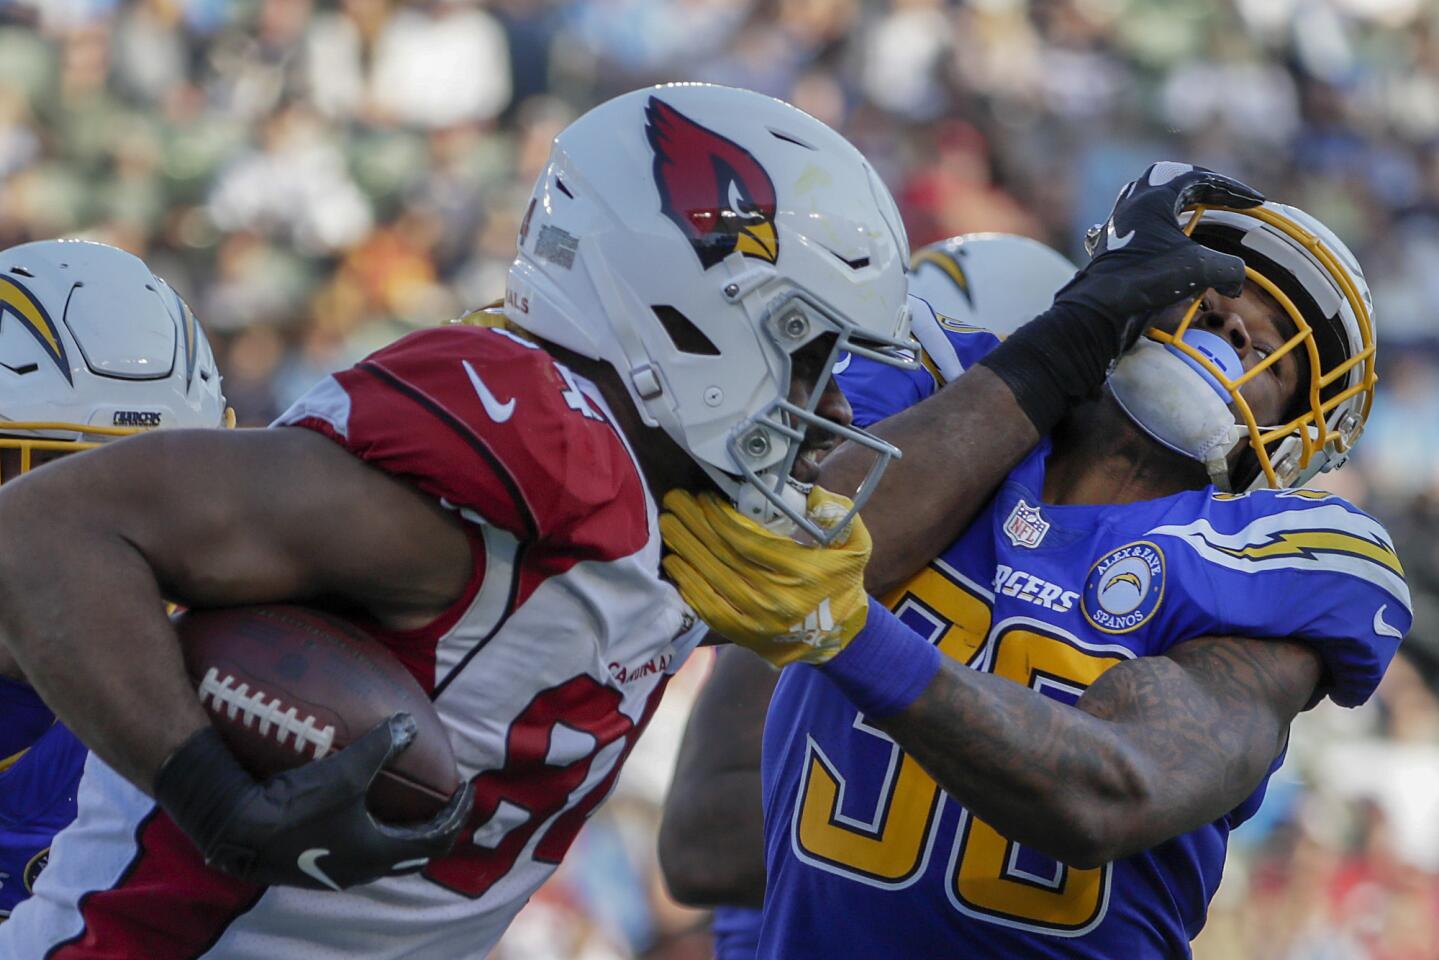 Chargers safety Derwin James wrestles Cardinals tight end Jermaine Gresham to the ground during third quarter action.